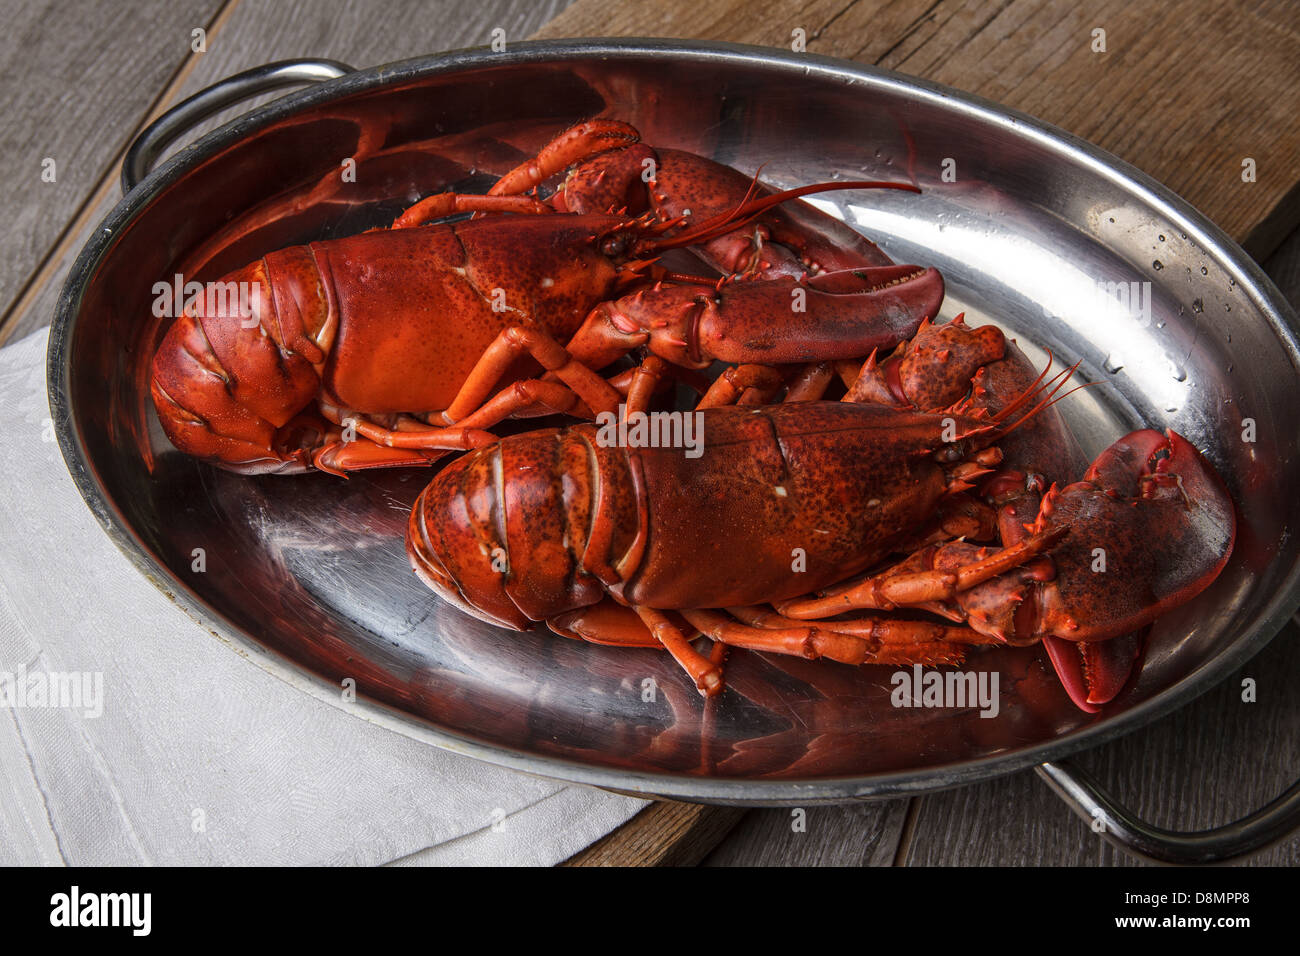 Cooked Lobster Stock Photo